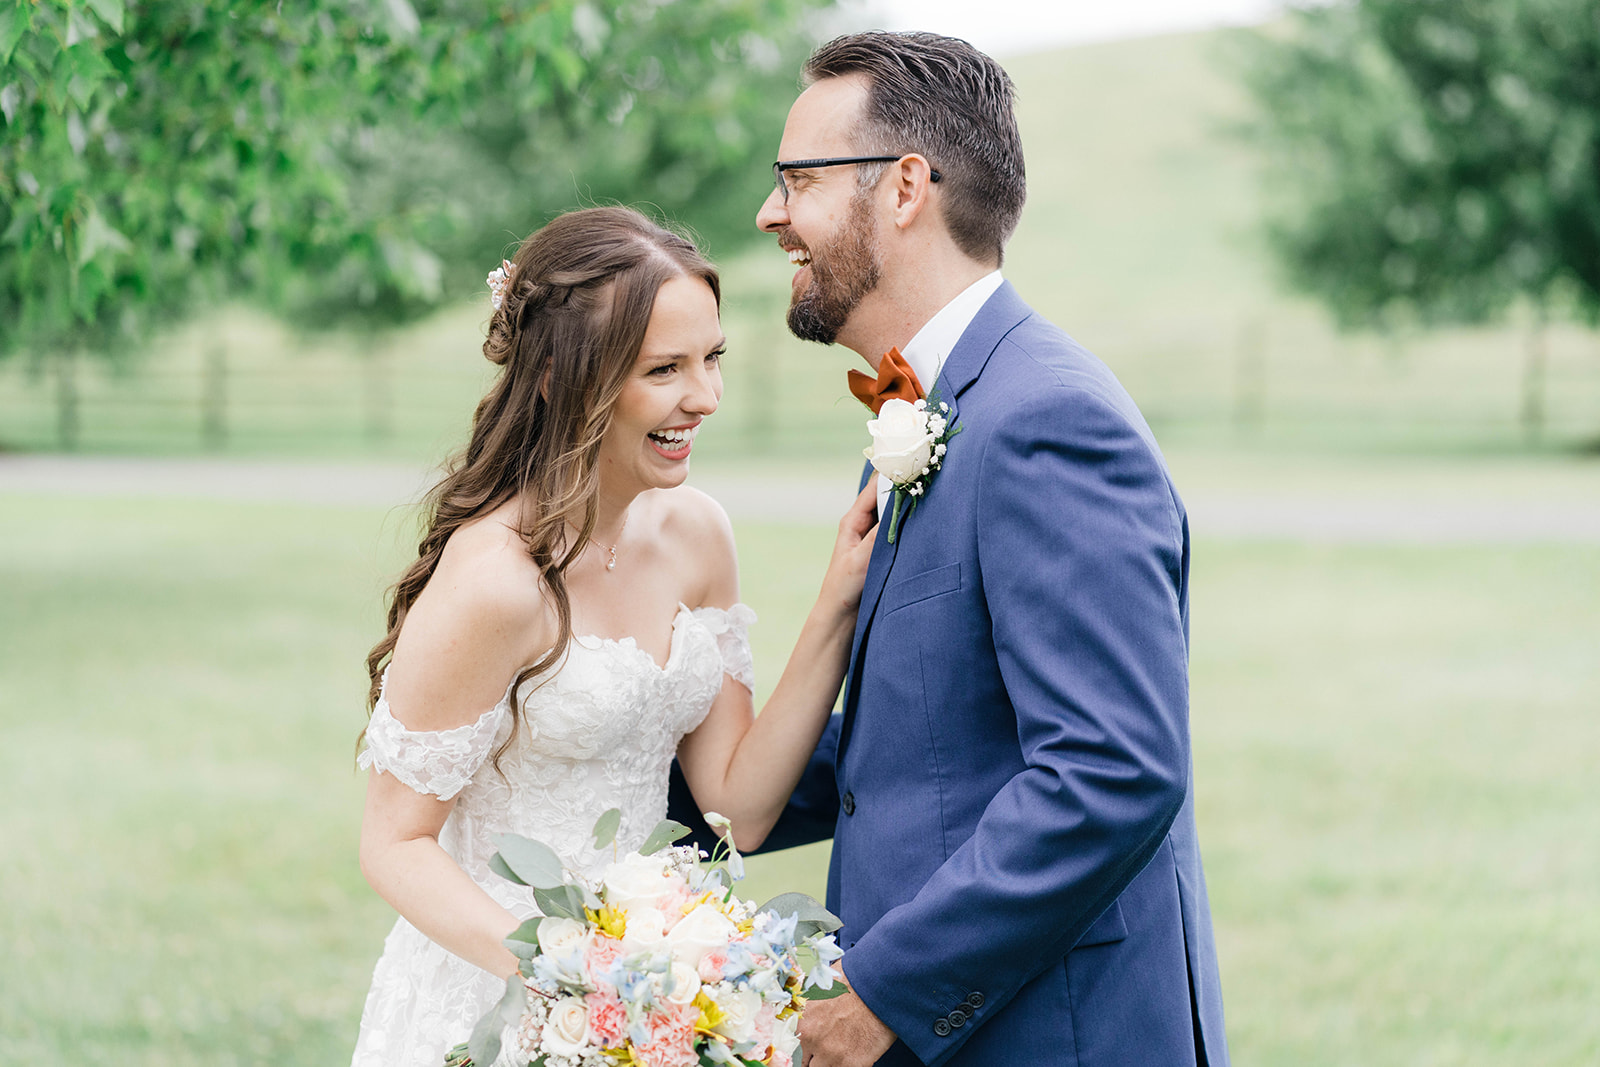 Armstrong farm joy-filled celebration in the rustic barn radiated love and charm_Marien J Malloy